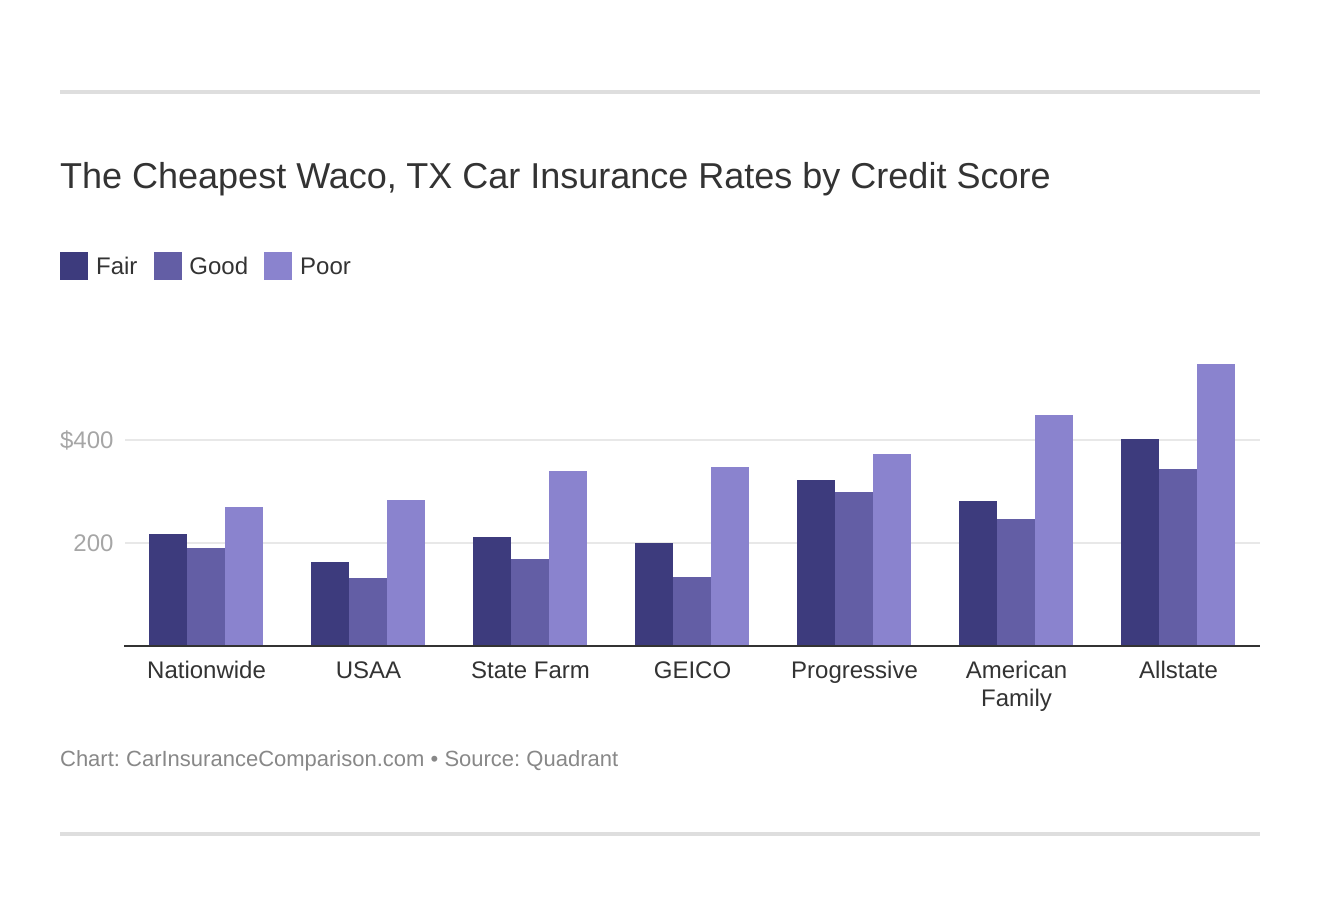 The Cheapest Waco, TX Car Insurance Rates by Credit Score